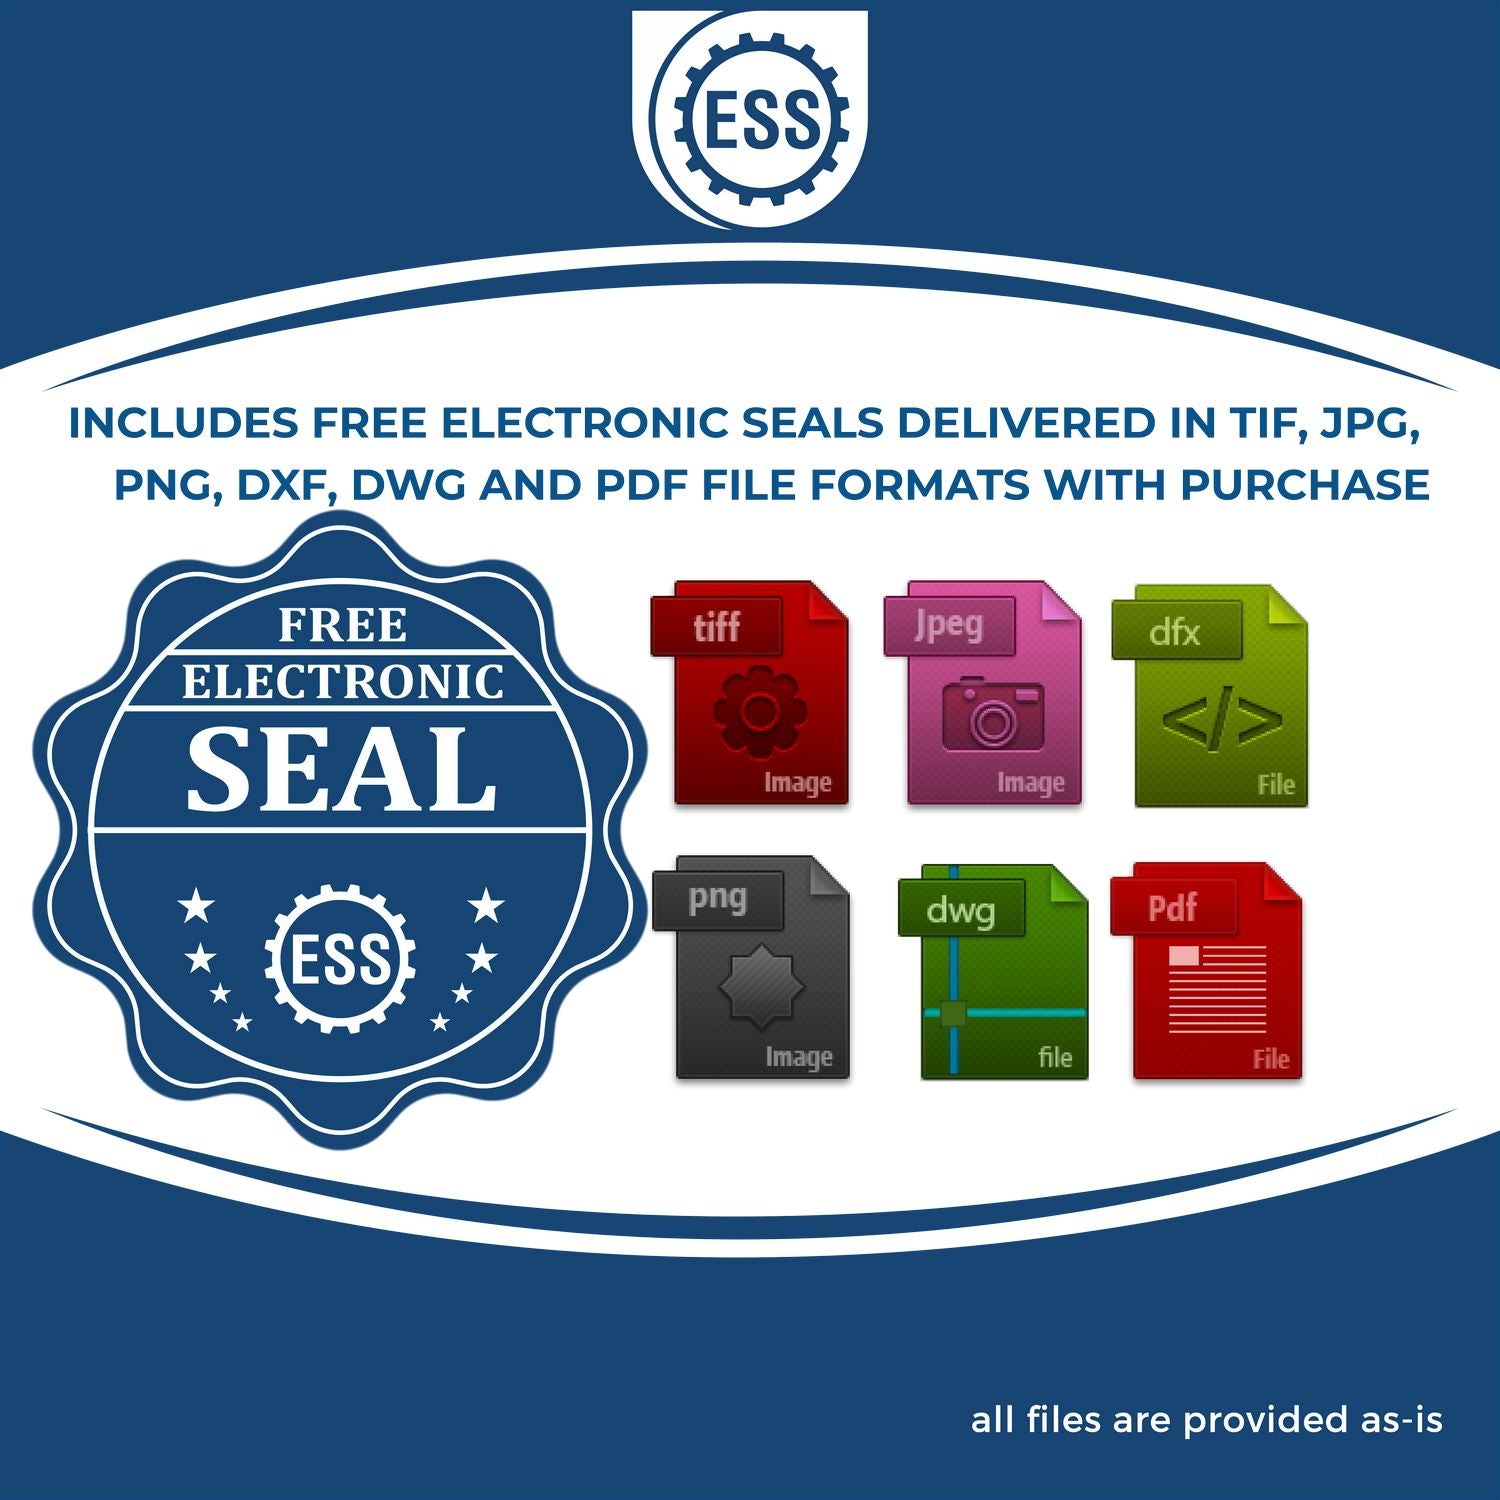 An infographic for the free electronic seal for the State of North Carolina Long Reach Architectural Embossing Seal illustrating the different file type icons such as DXF, DWG, TIF, JPG and PNG.